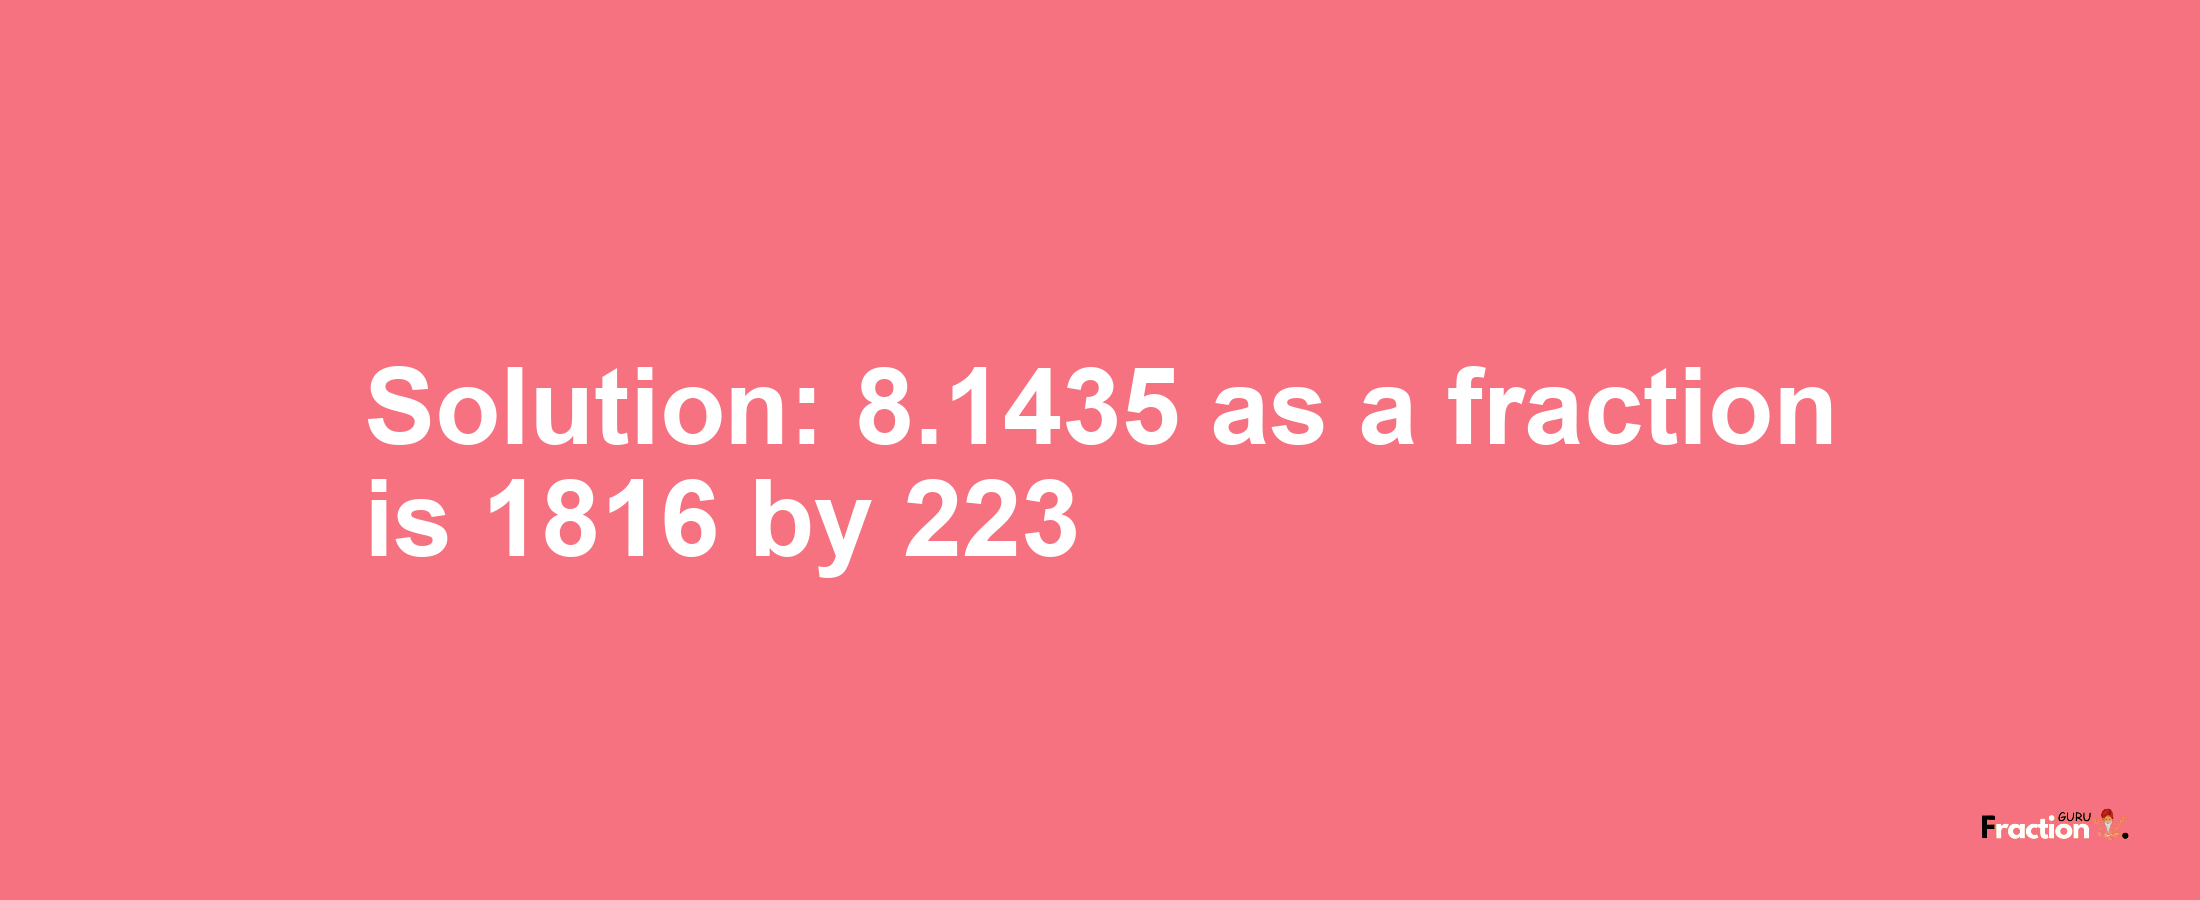 Solution:8.1435 as a fraction is 1816/223